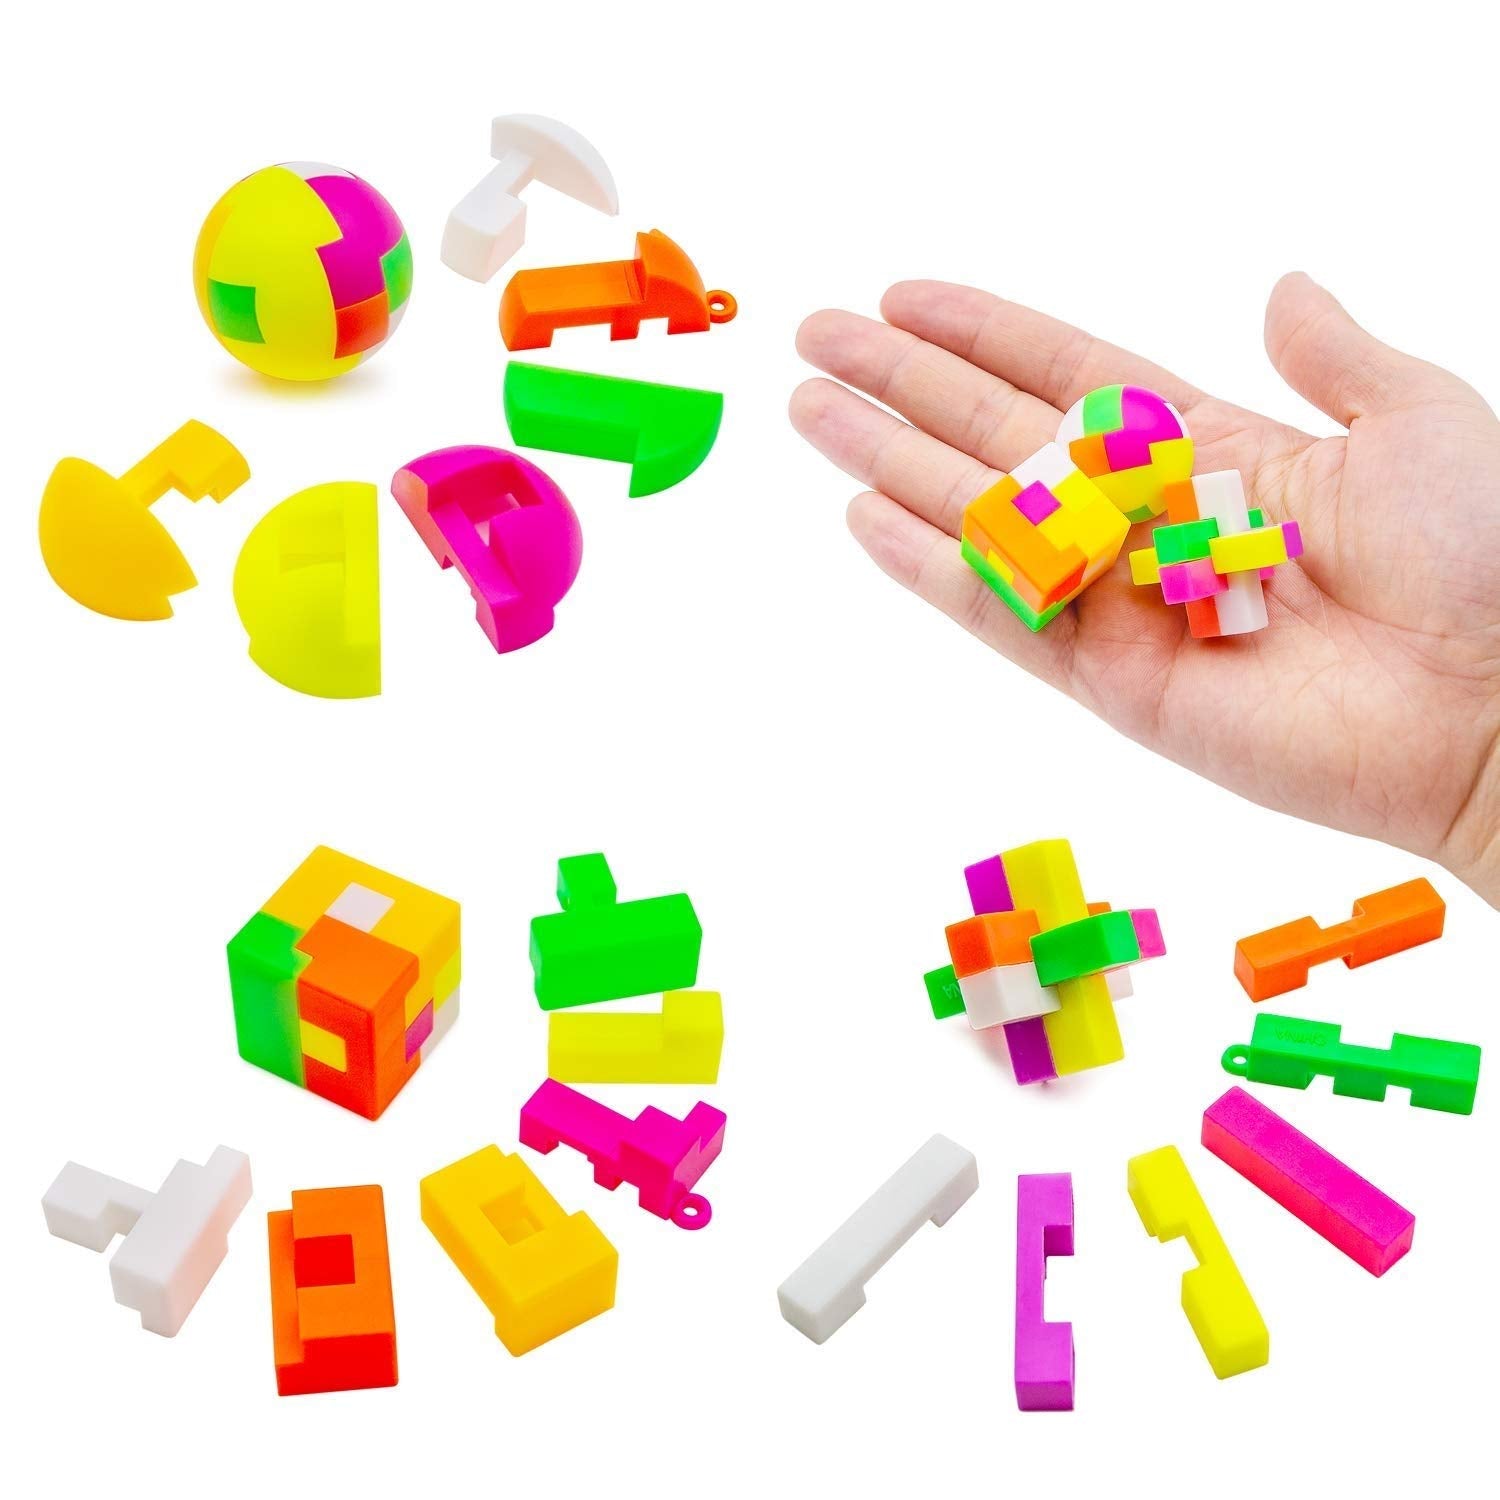 40PCS Carnival Prizes for Kids Birthday Party Favors, Prizes Box Toy Assortment Bundle for Classroom Rewards, Pinata Filler, Treasure Box, Goodie Bag Filler, School Supplies for Students